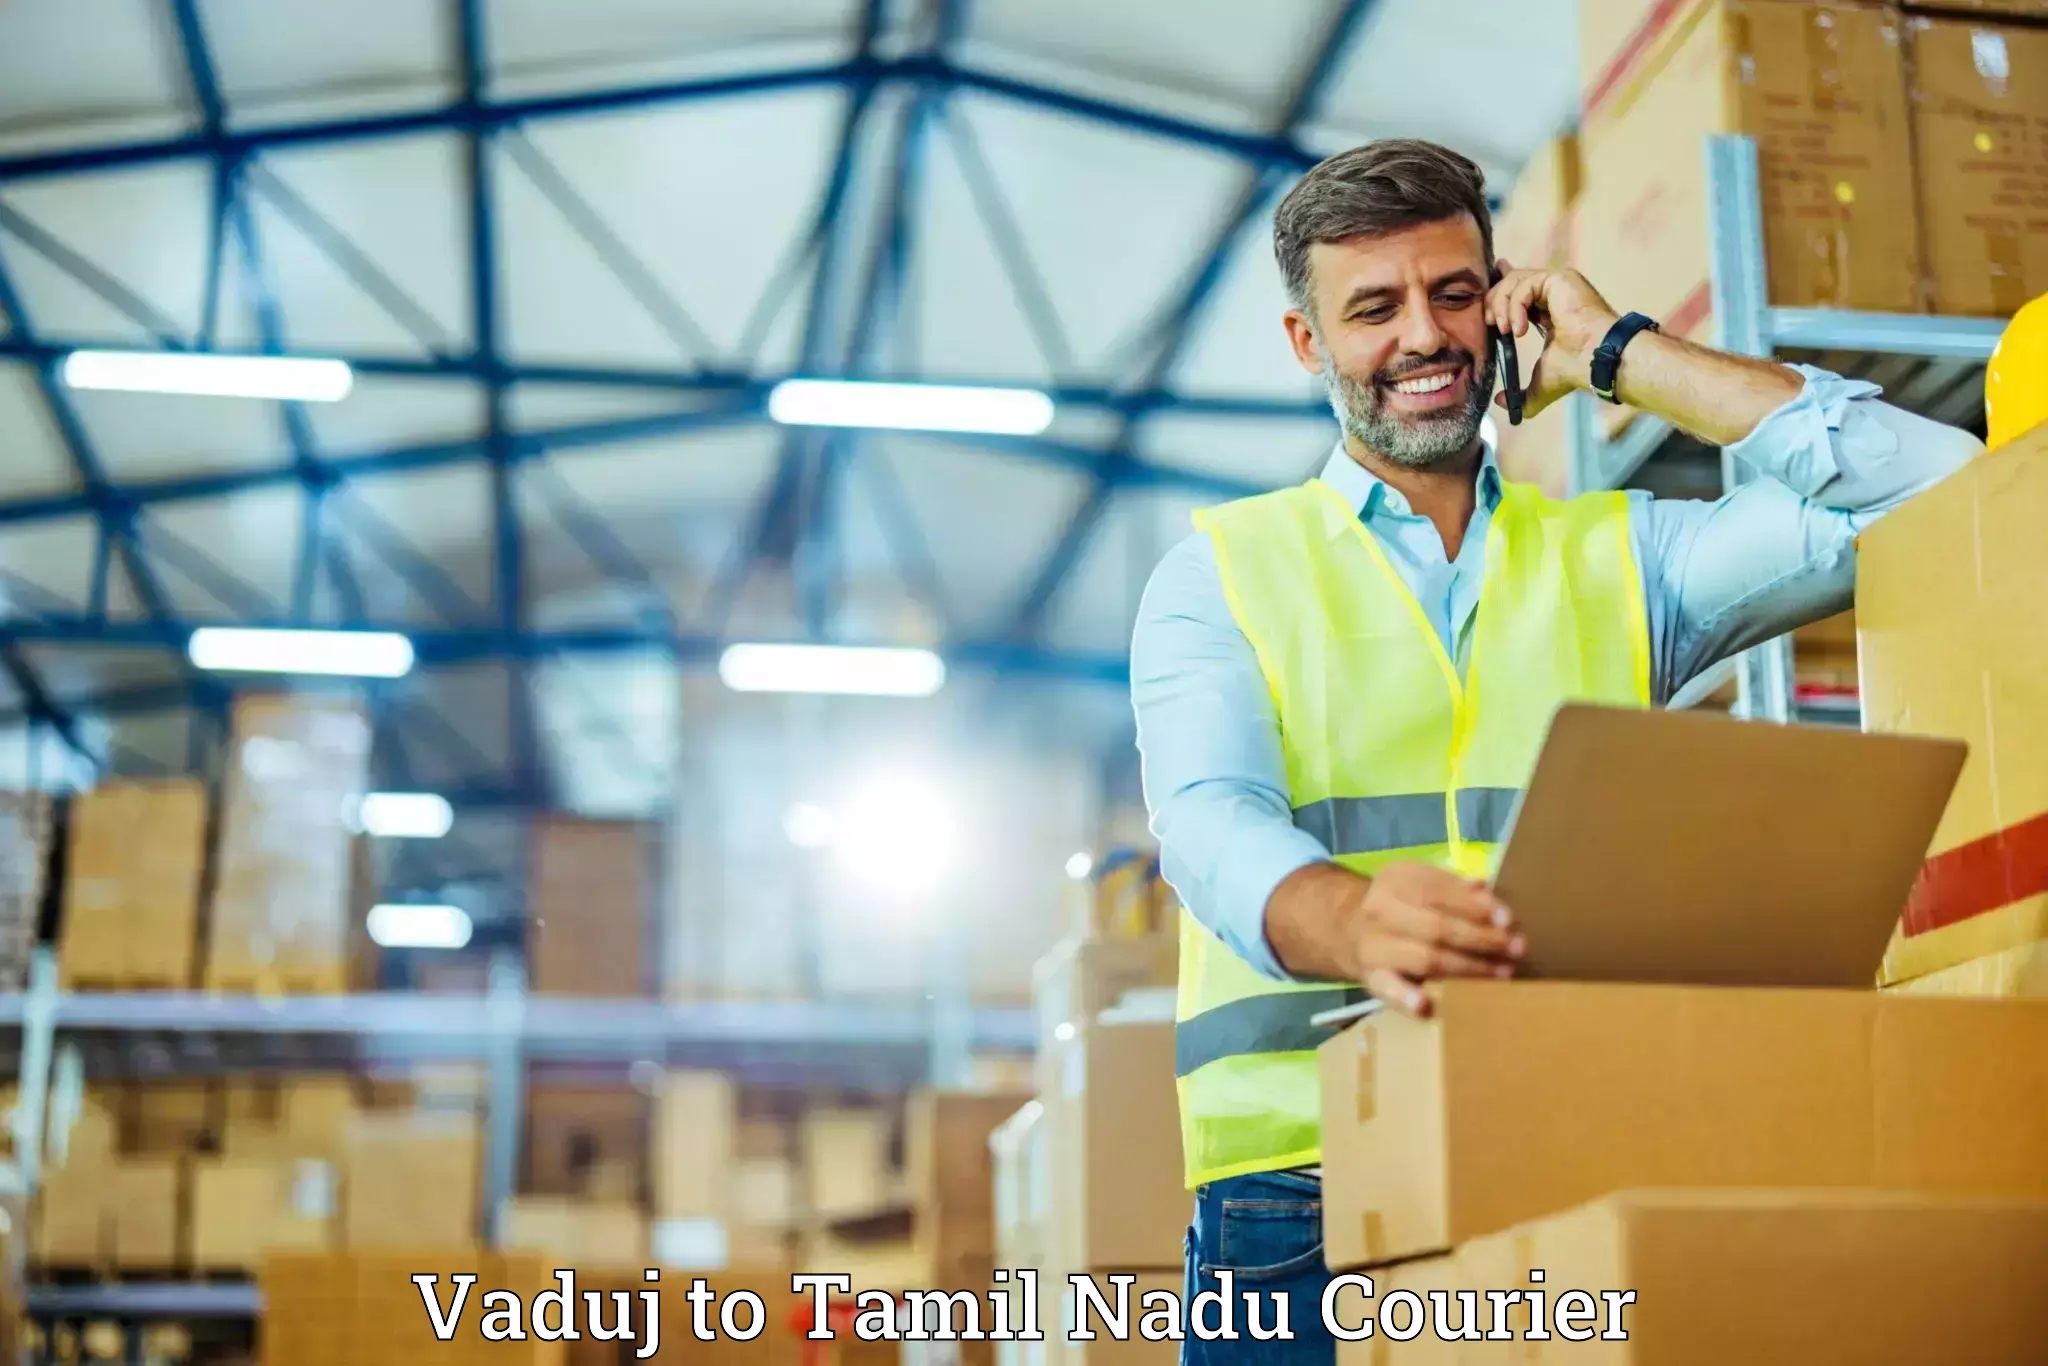 Hassle-free luggage shipping Vaduj to Eral